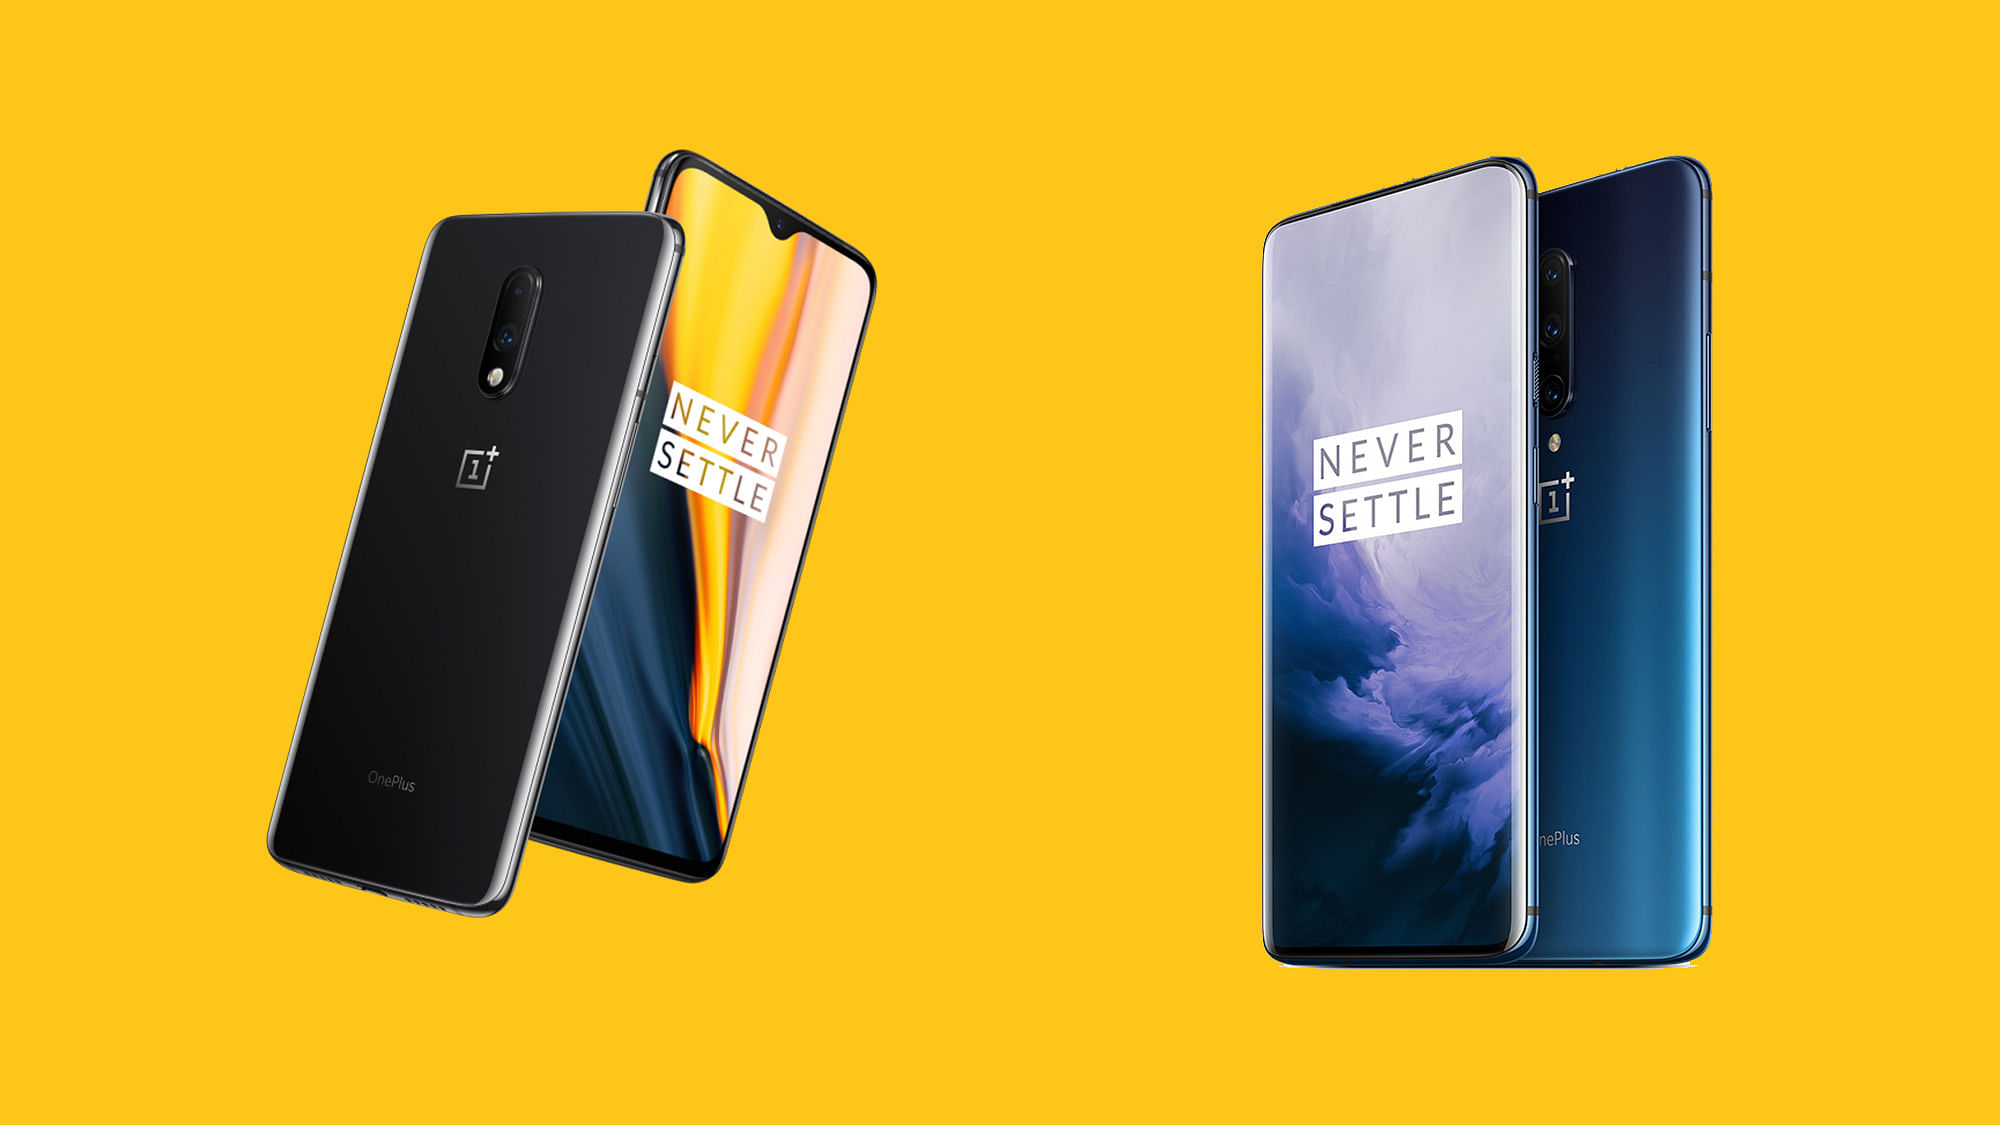 OnePlus 7 (left) and OnePlus 7 Pro (right)